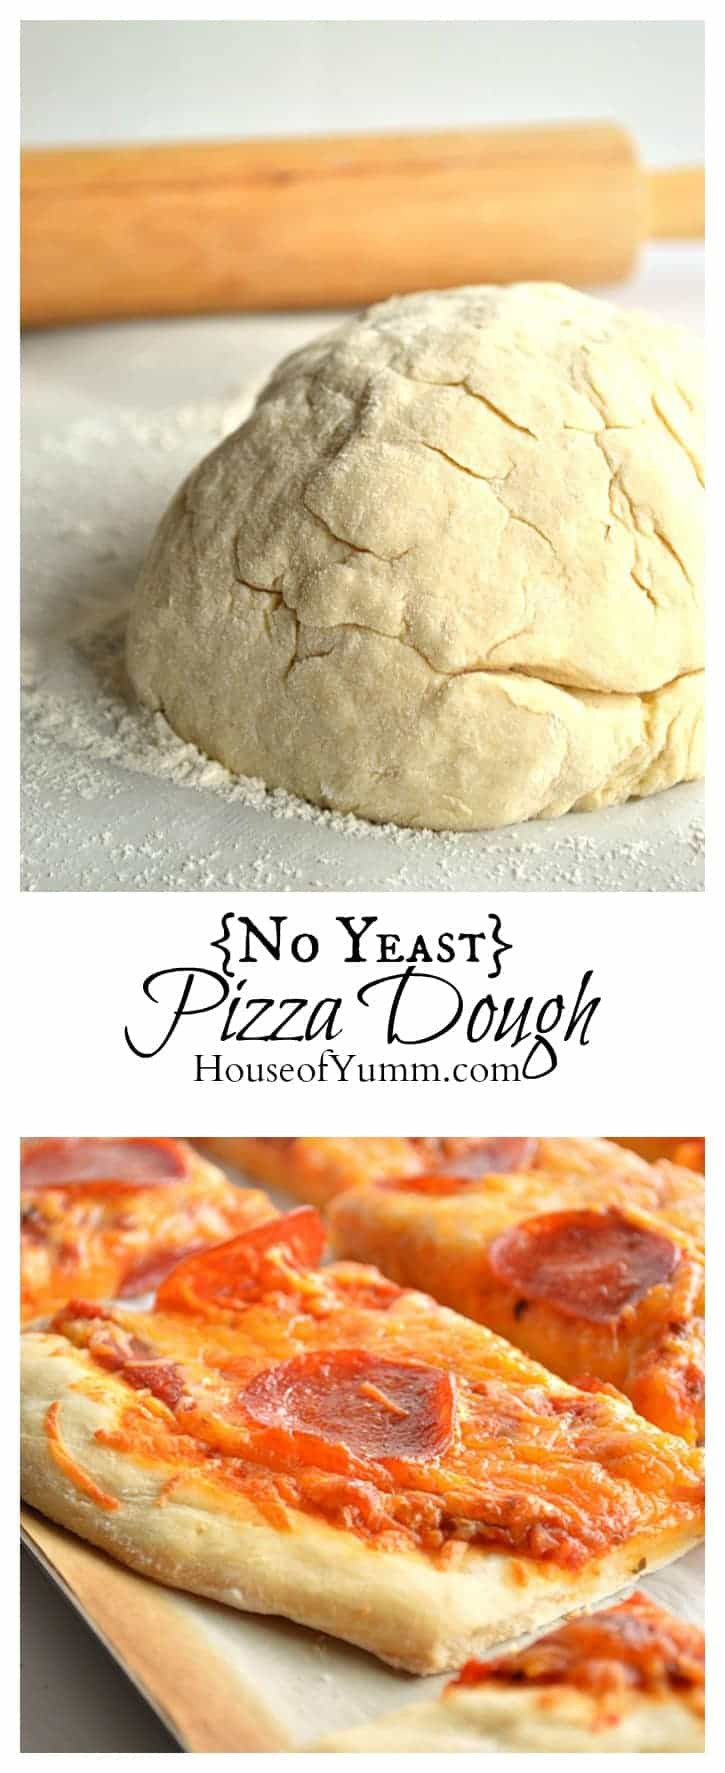 Pizza Dough With Yeast
 No Yeast Pizza Dough House of Yumm